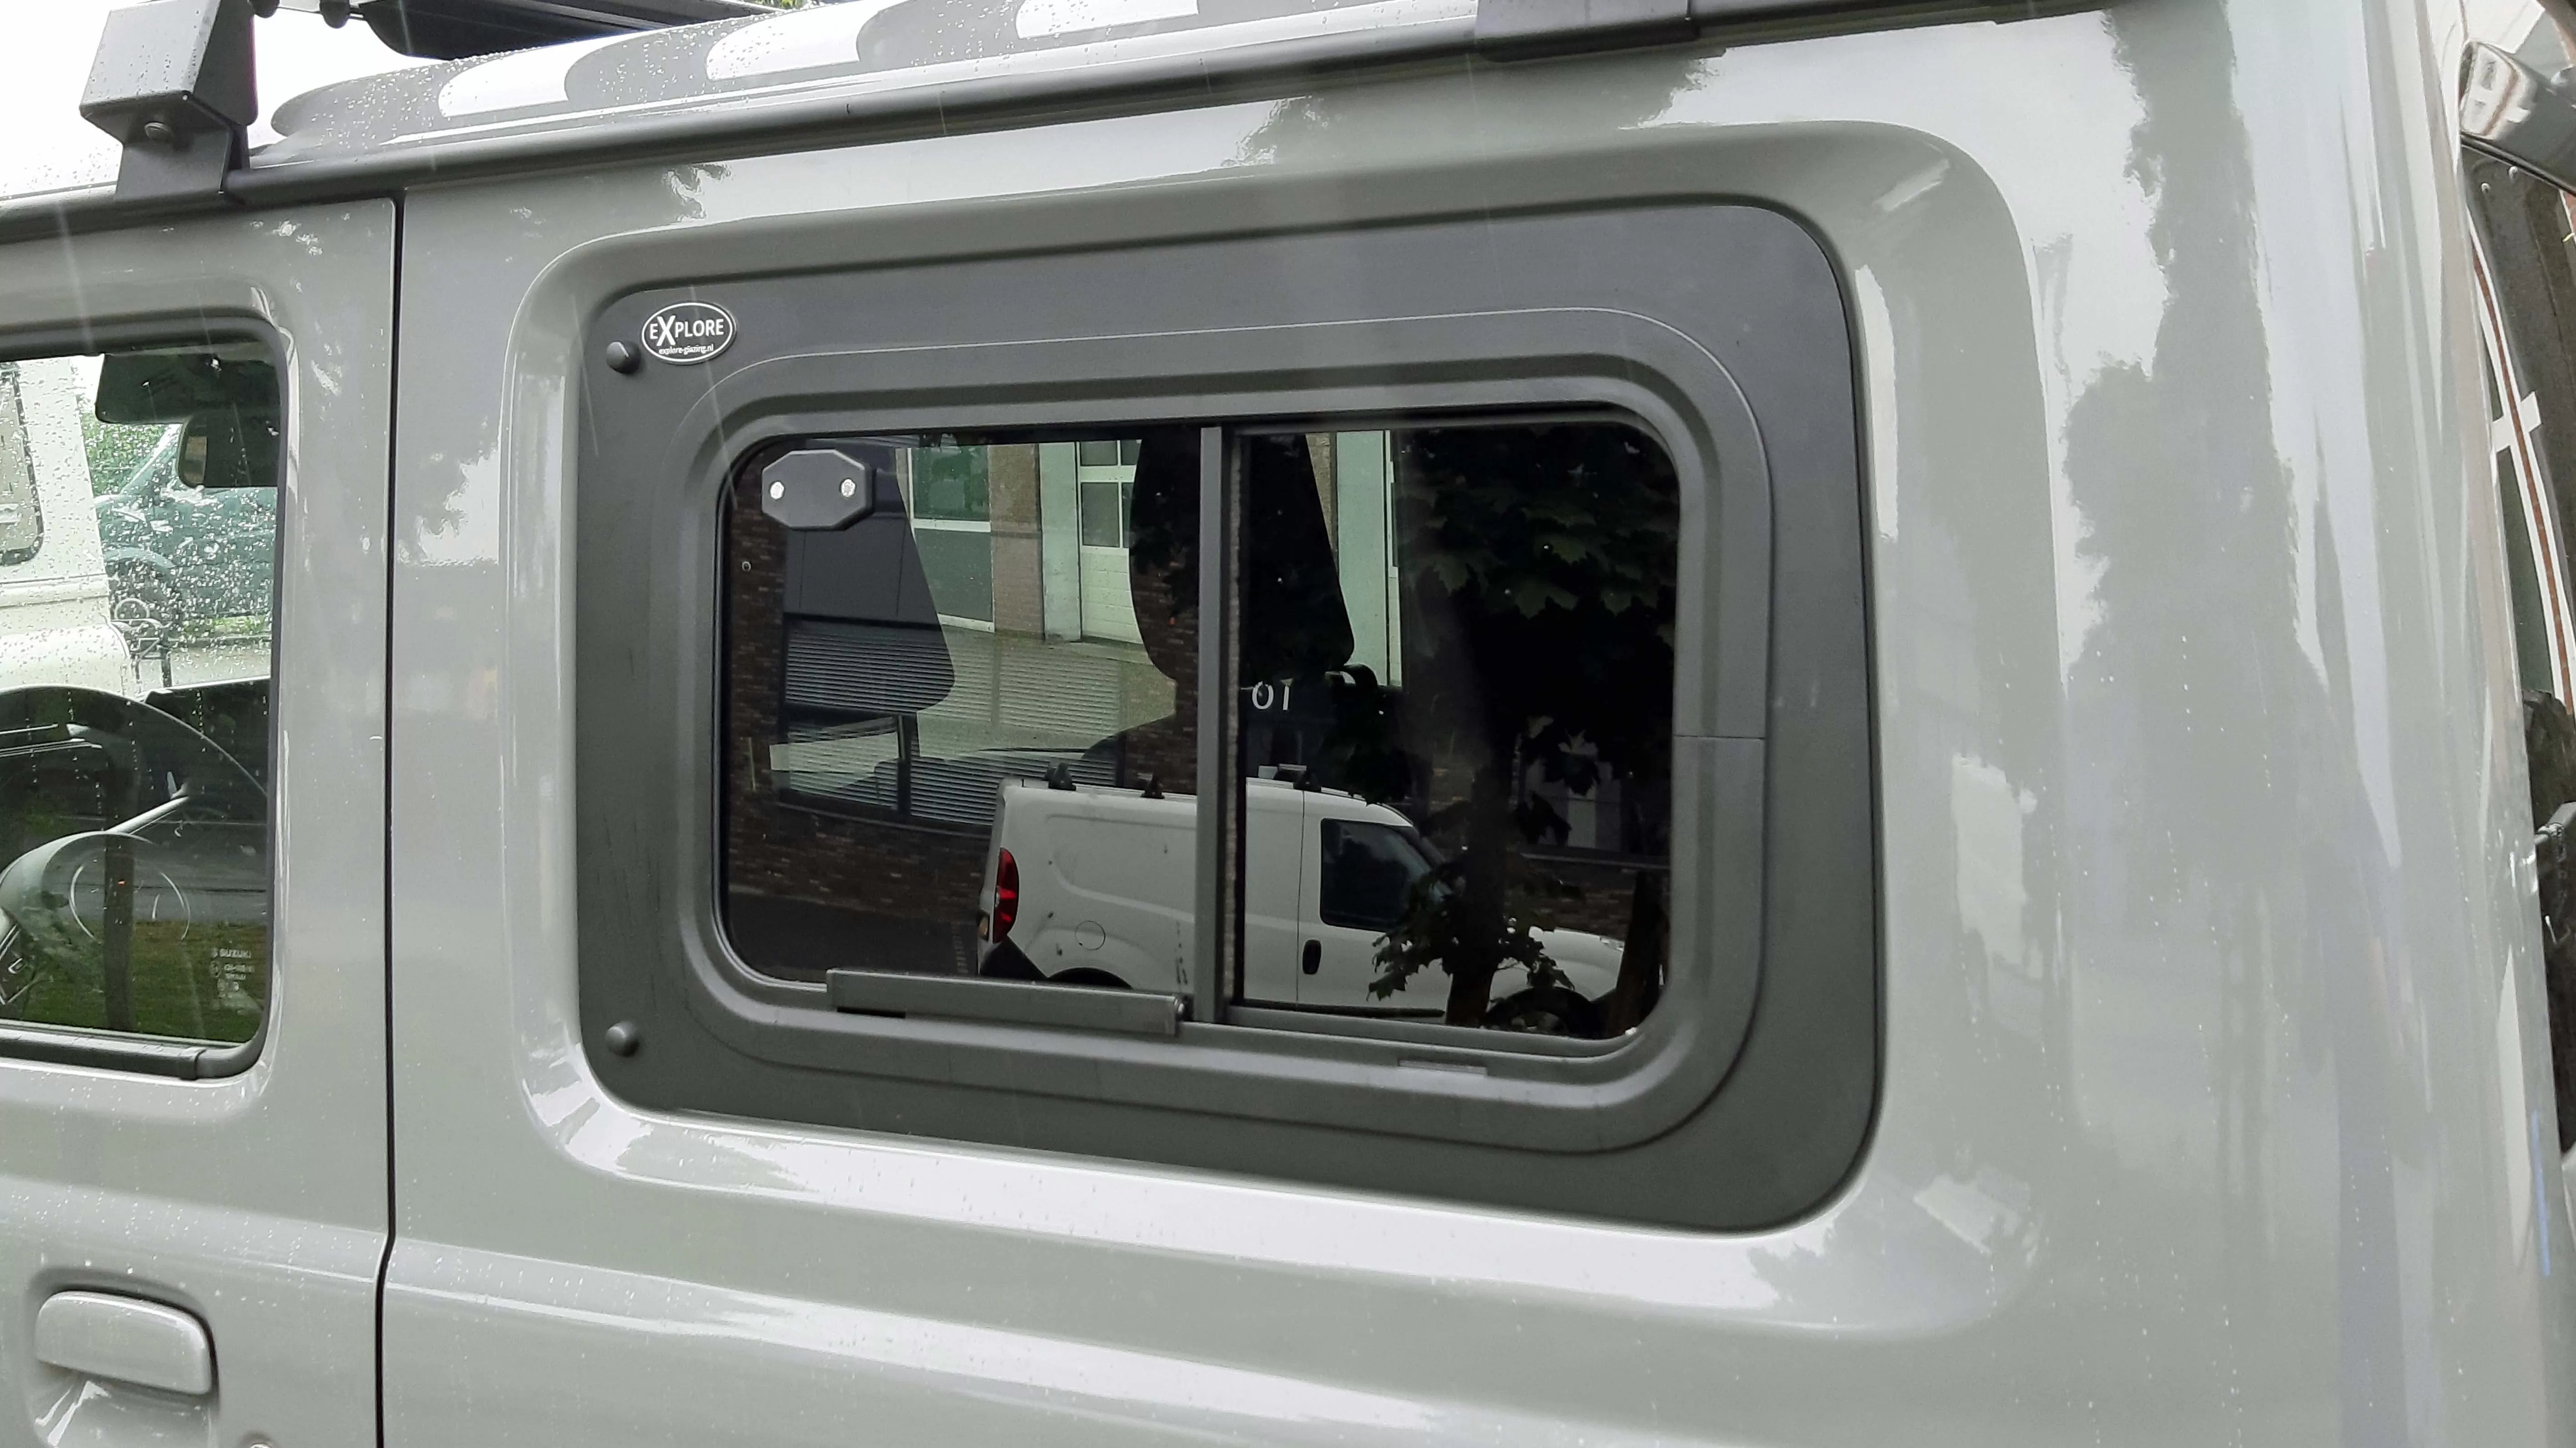 Close-up view of Explore Glazing's exterior sliding window fitted on a Suzuki Jimny GJ (JB74), HJ, or GLX 3-door, featuring a sleek design and rain droplets on the surface, reflecting the urban environment.